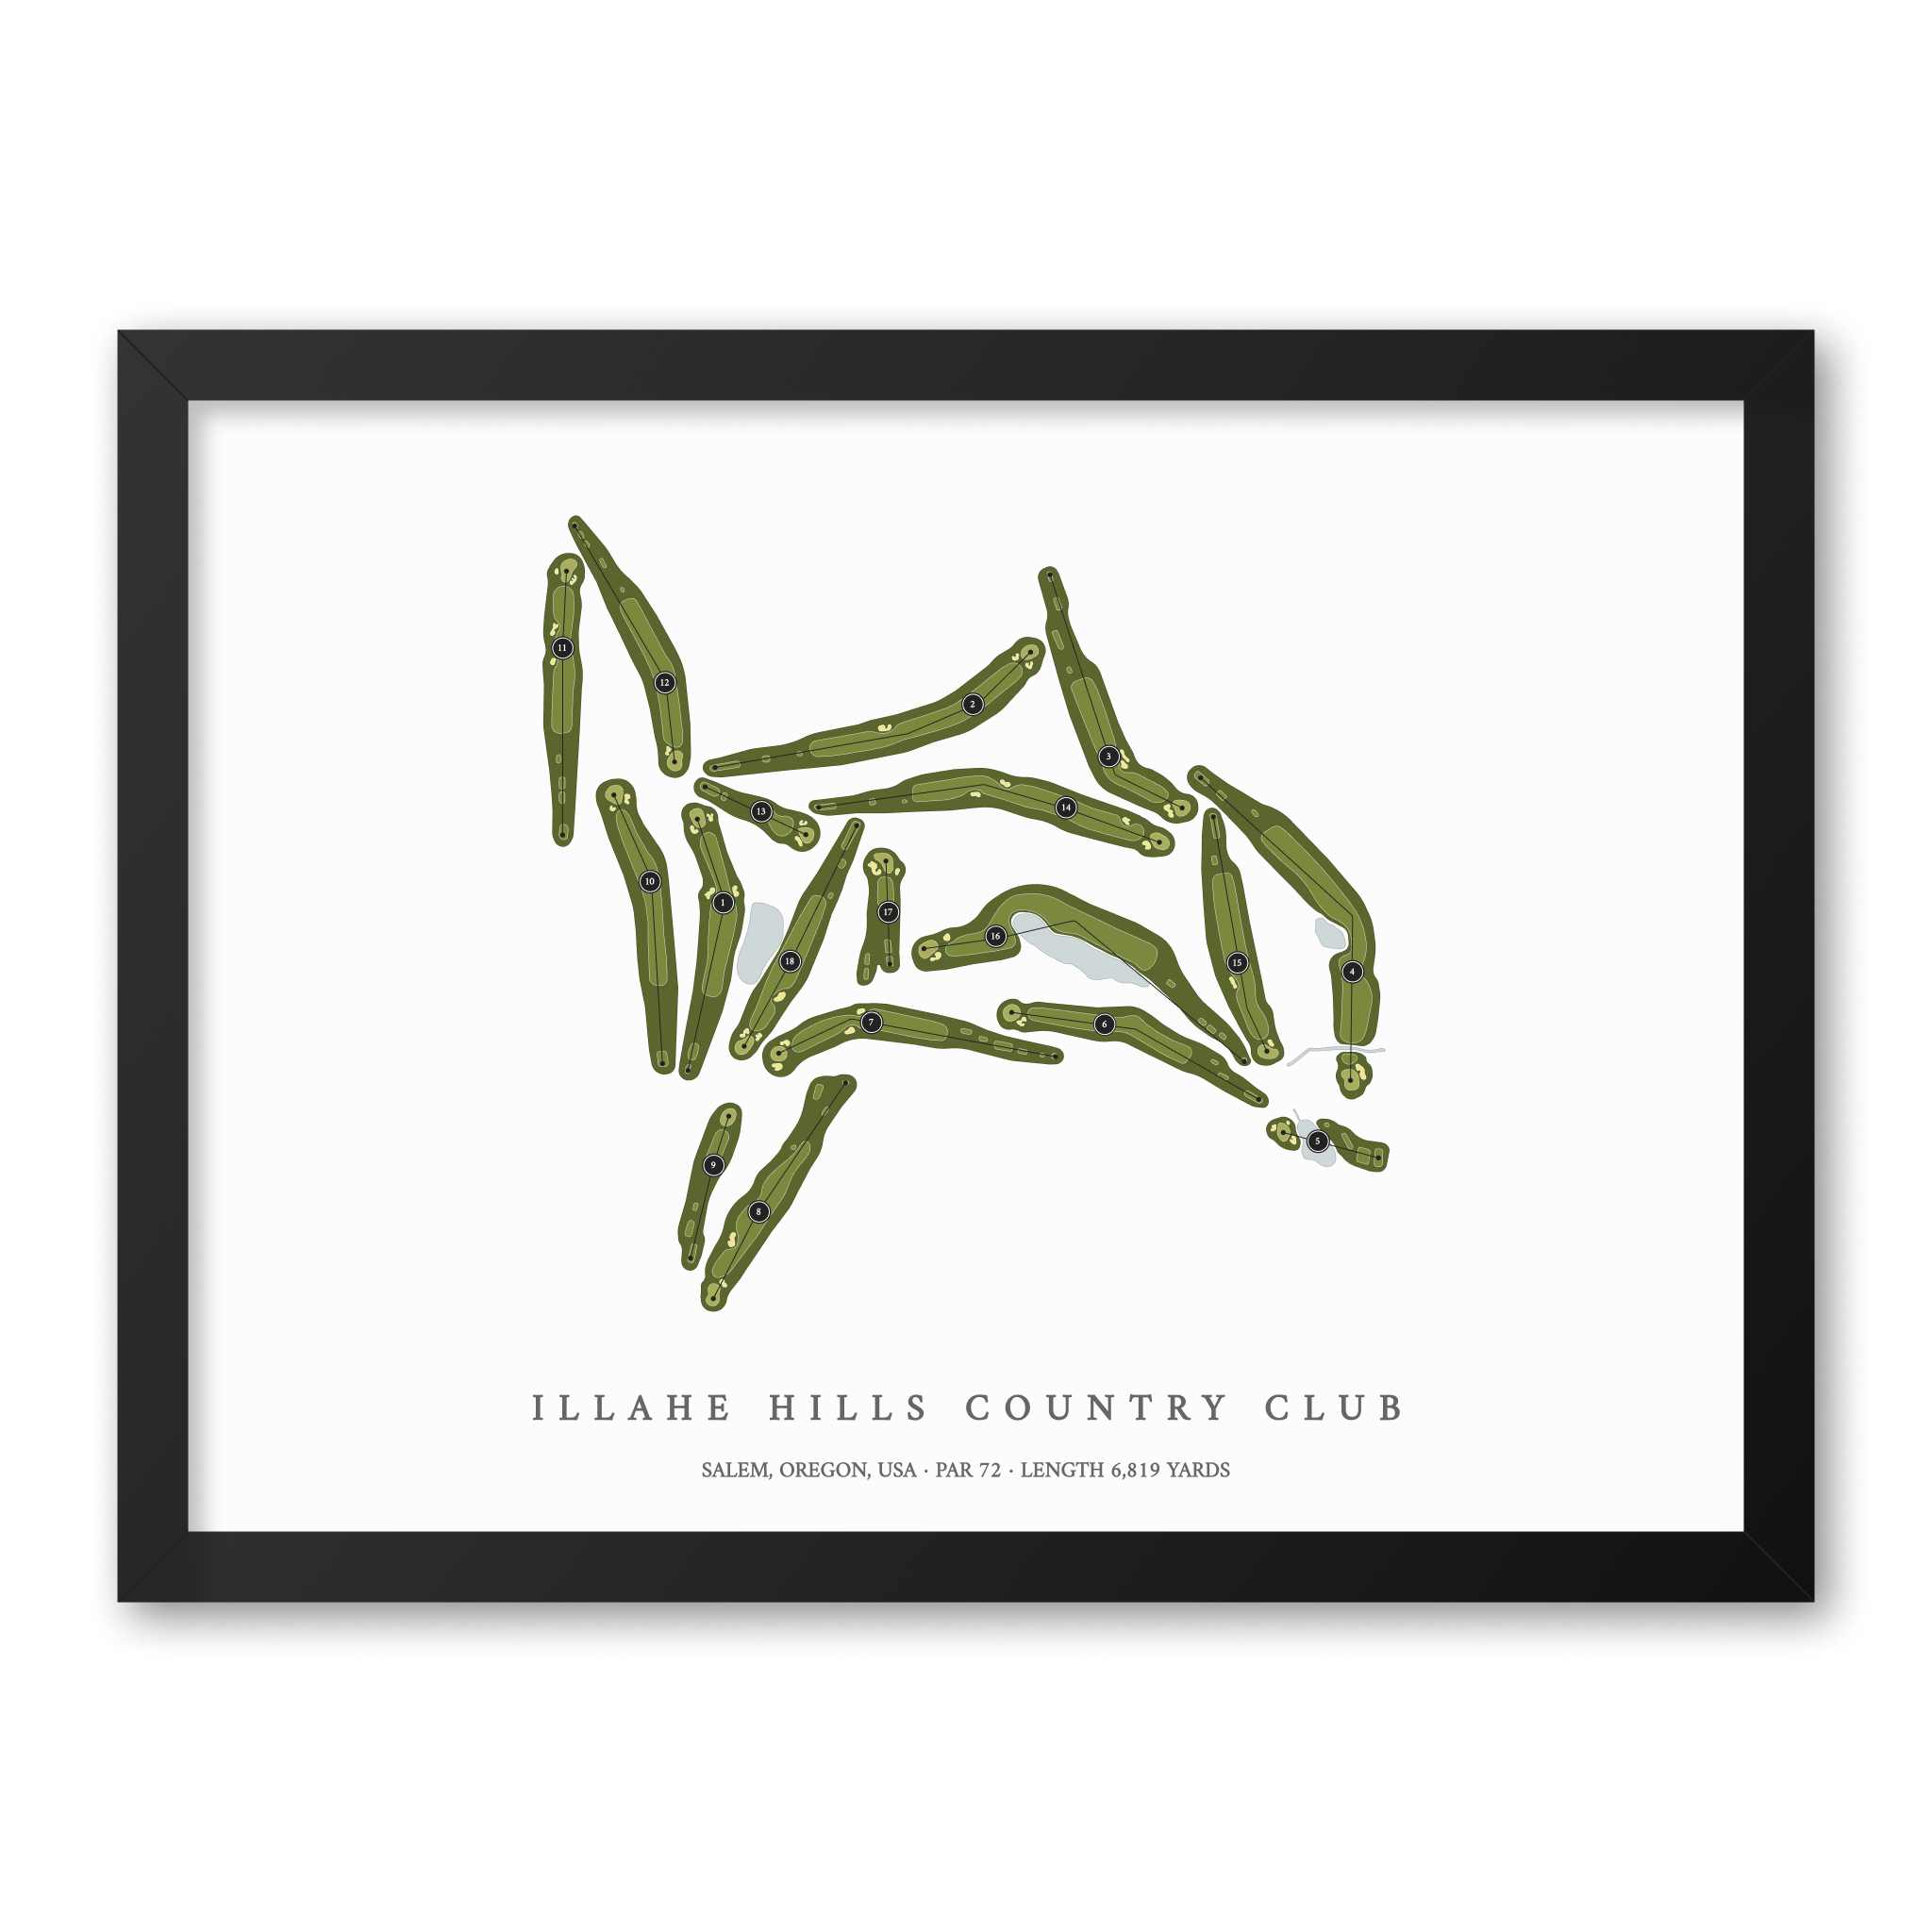 Illahe Hills Country Club| Golf Course Print | Black Frame With Hole Numbers #hole numbers_yes